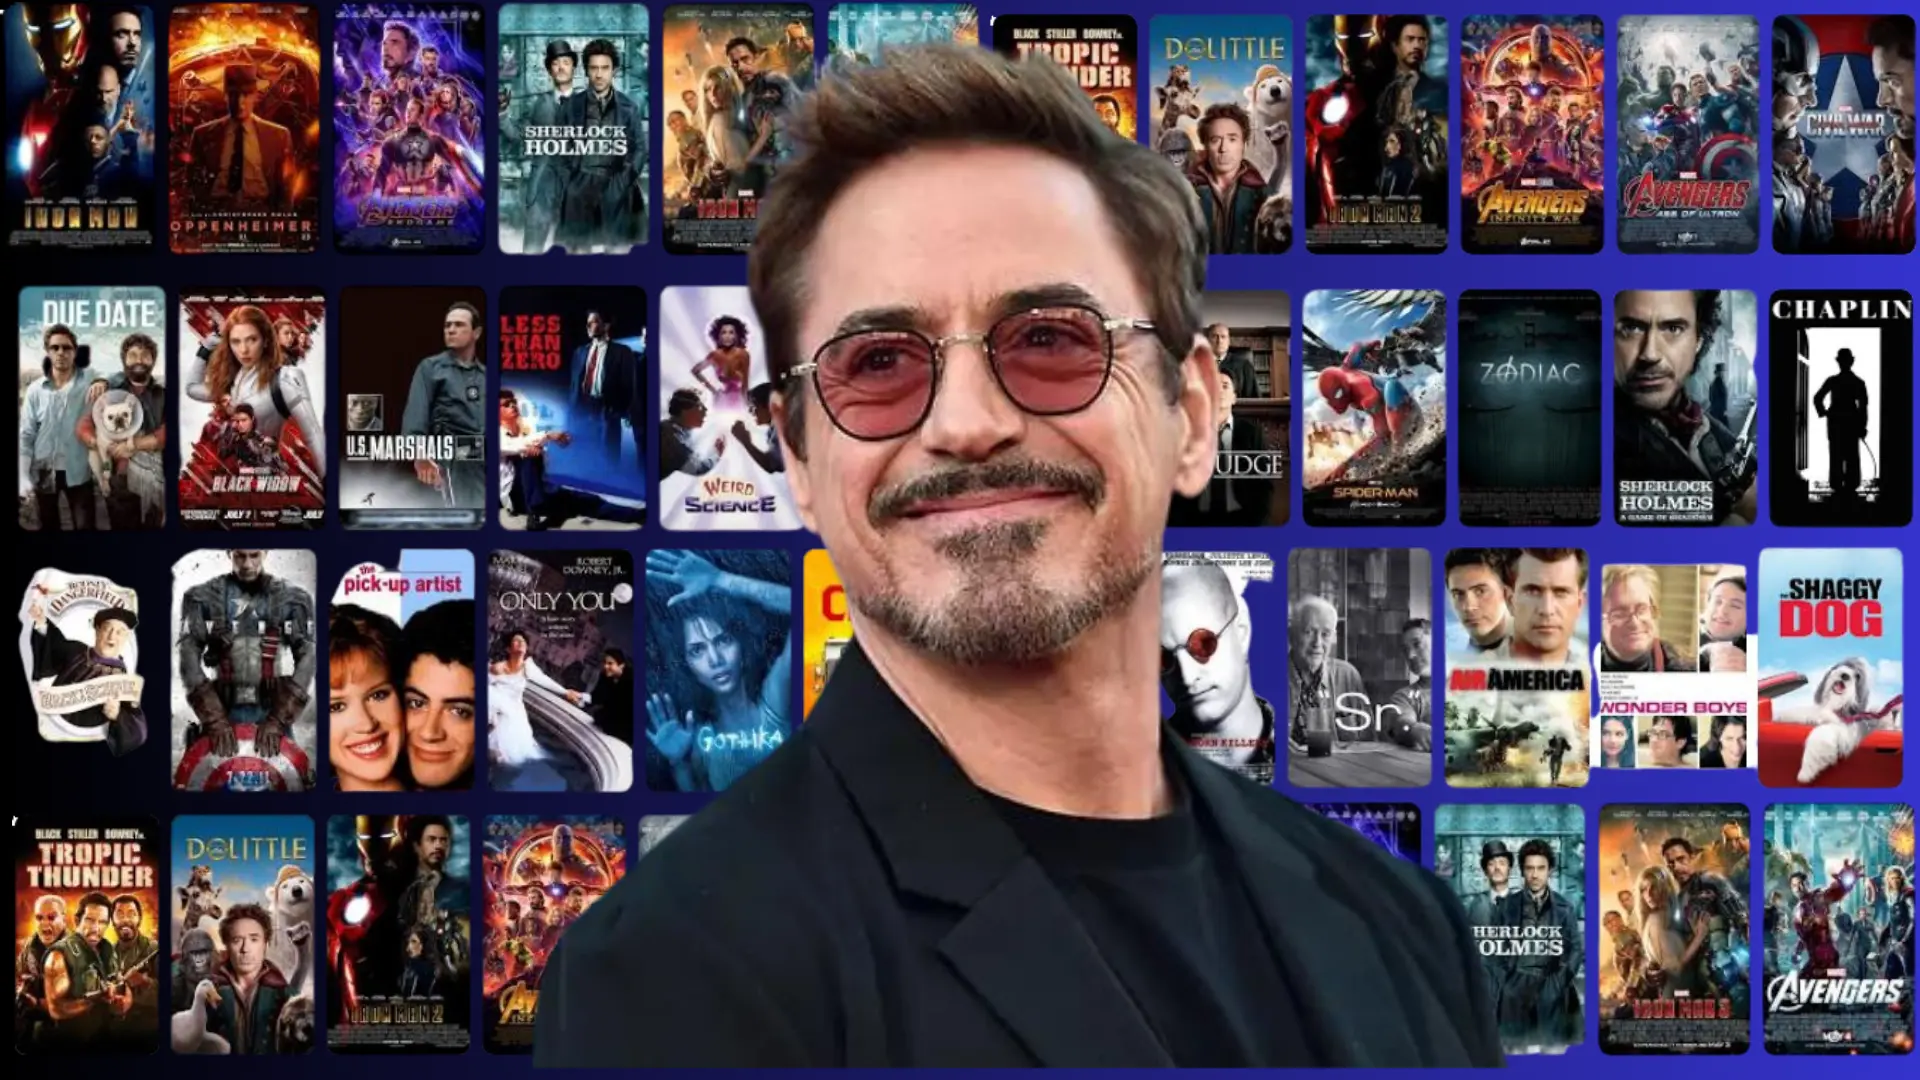 Robert Downey Jr. biography: a remarkable journey of talent, resilience, and redemption